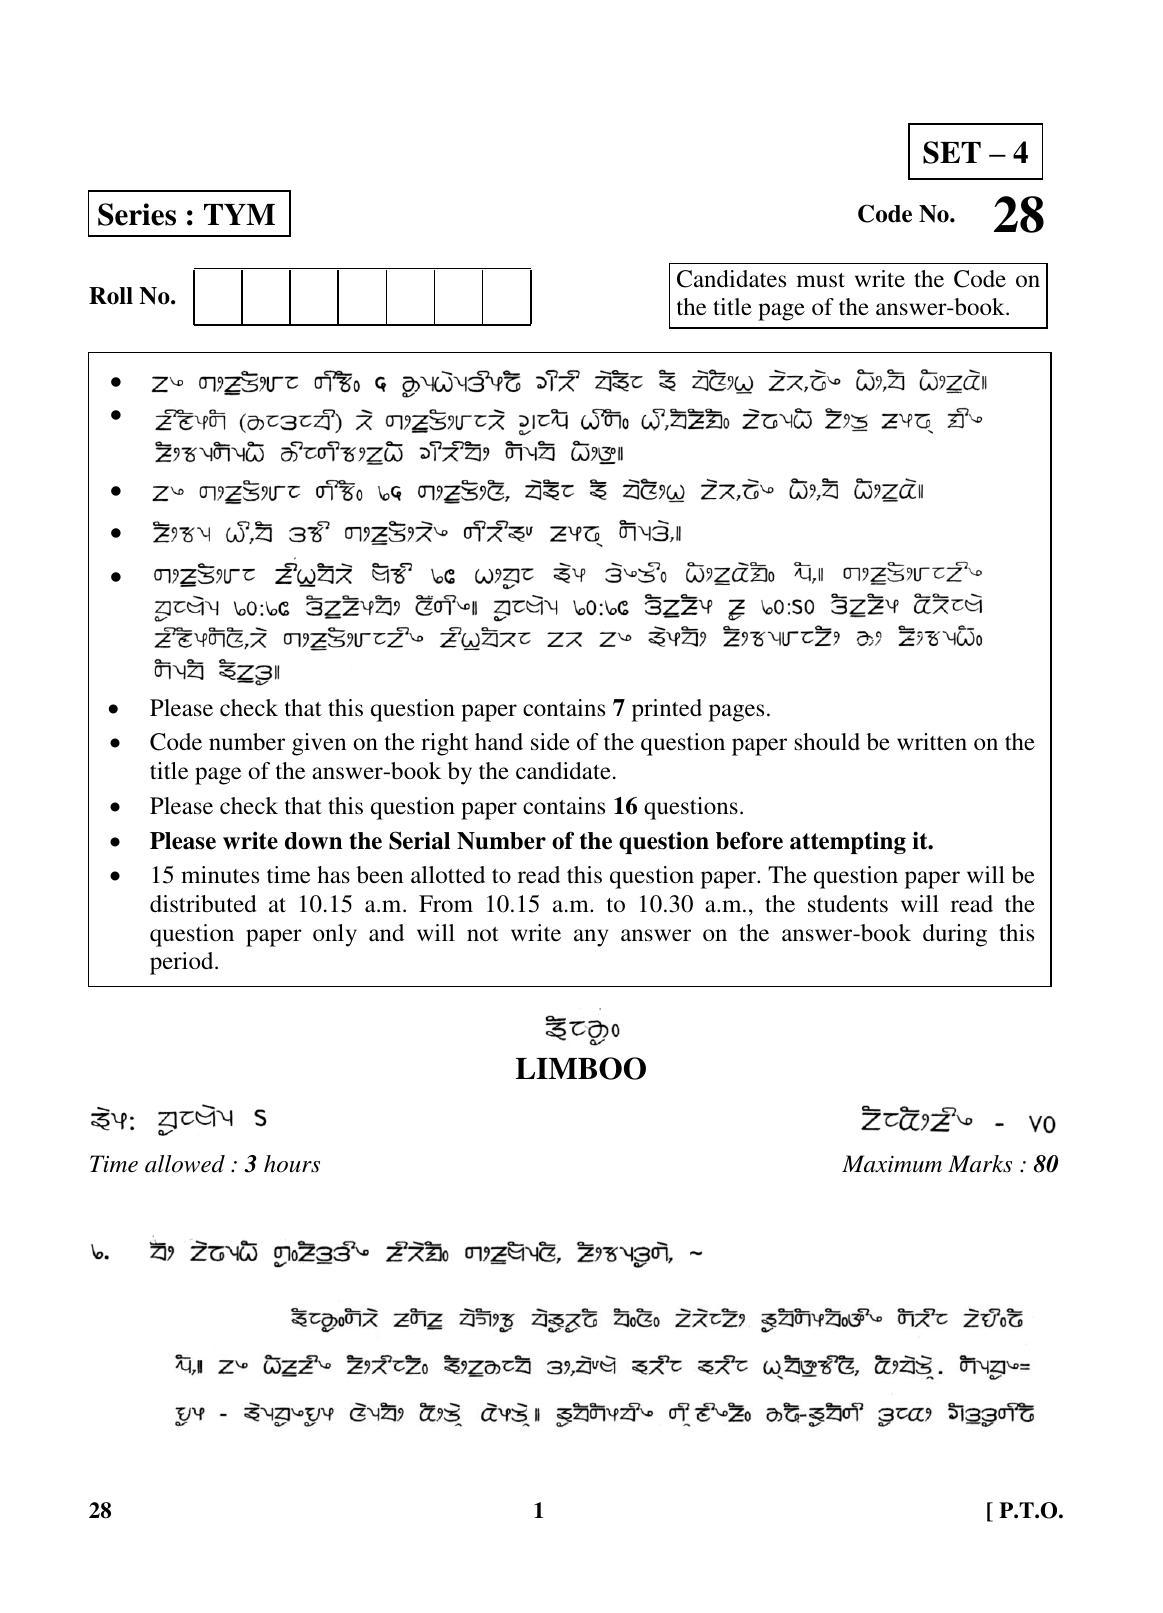 CBSE Class 10 28 (Limboo) 2018 Question Paper - Page 1